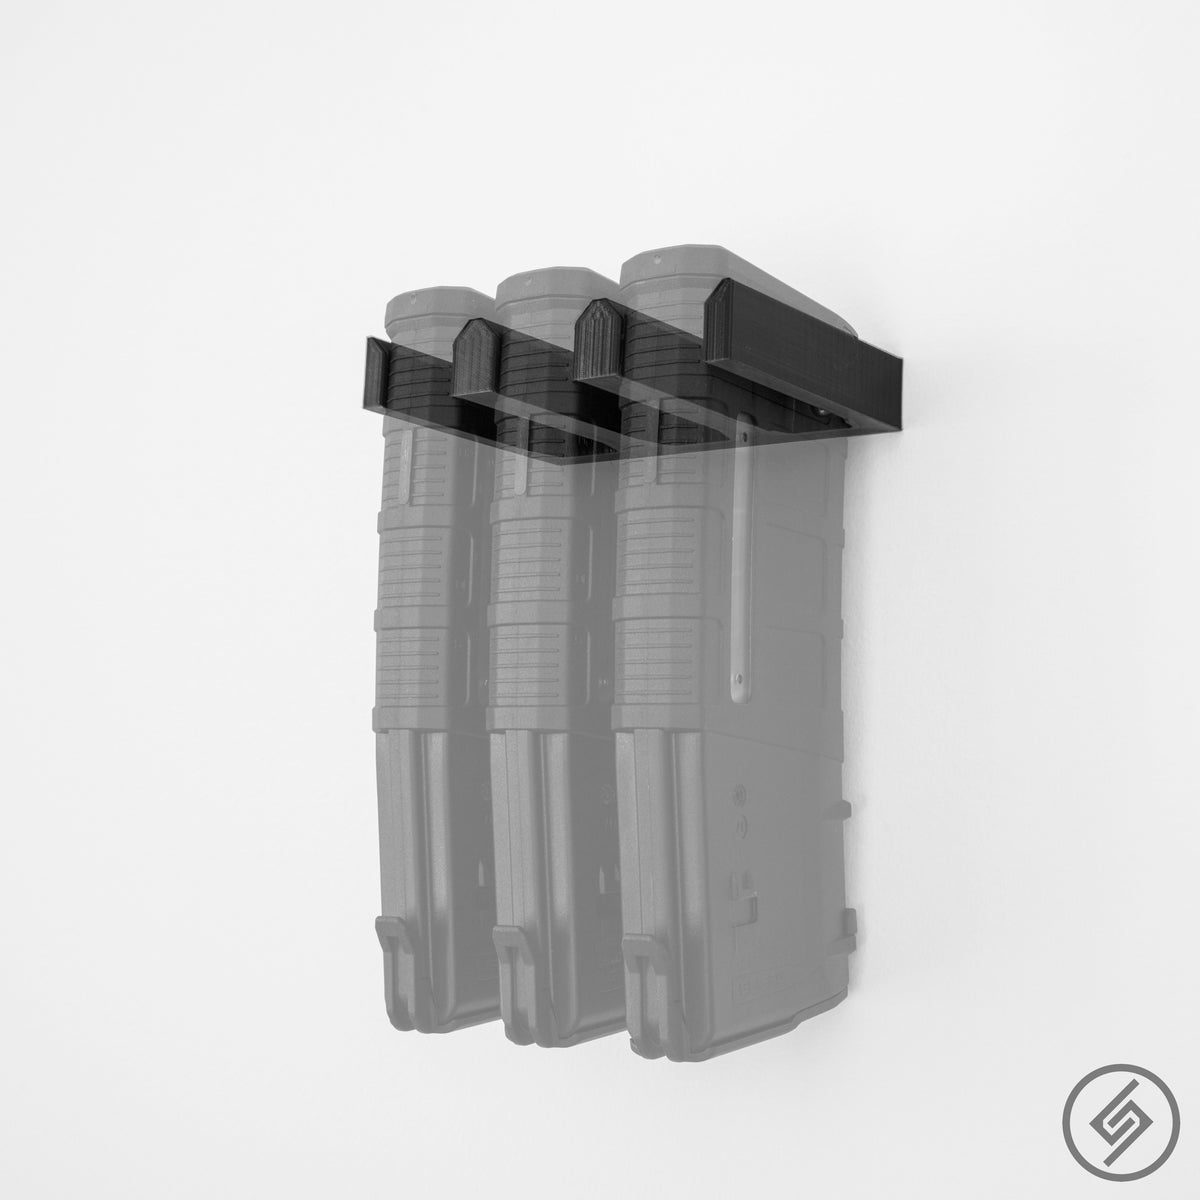 Mount for AR 15 Pmag Mags - Slatwall